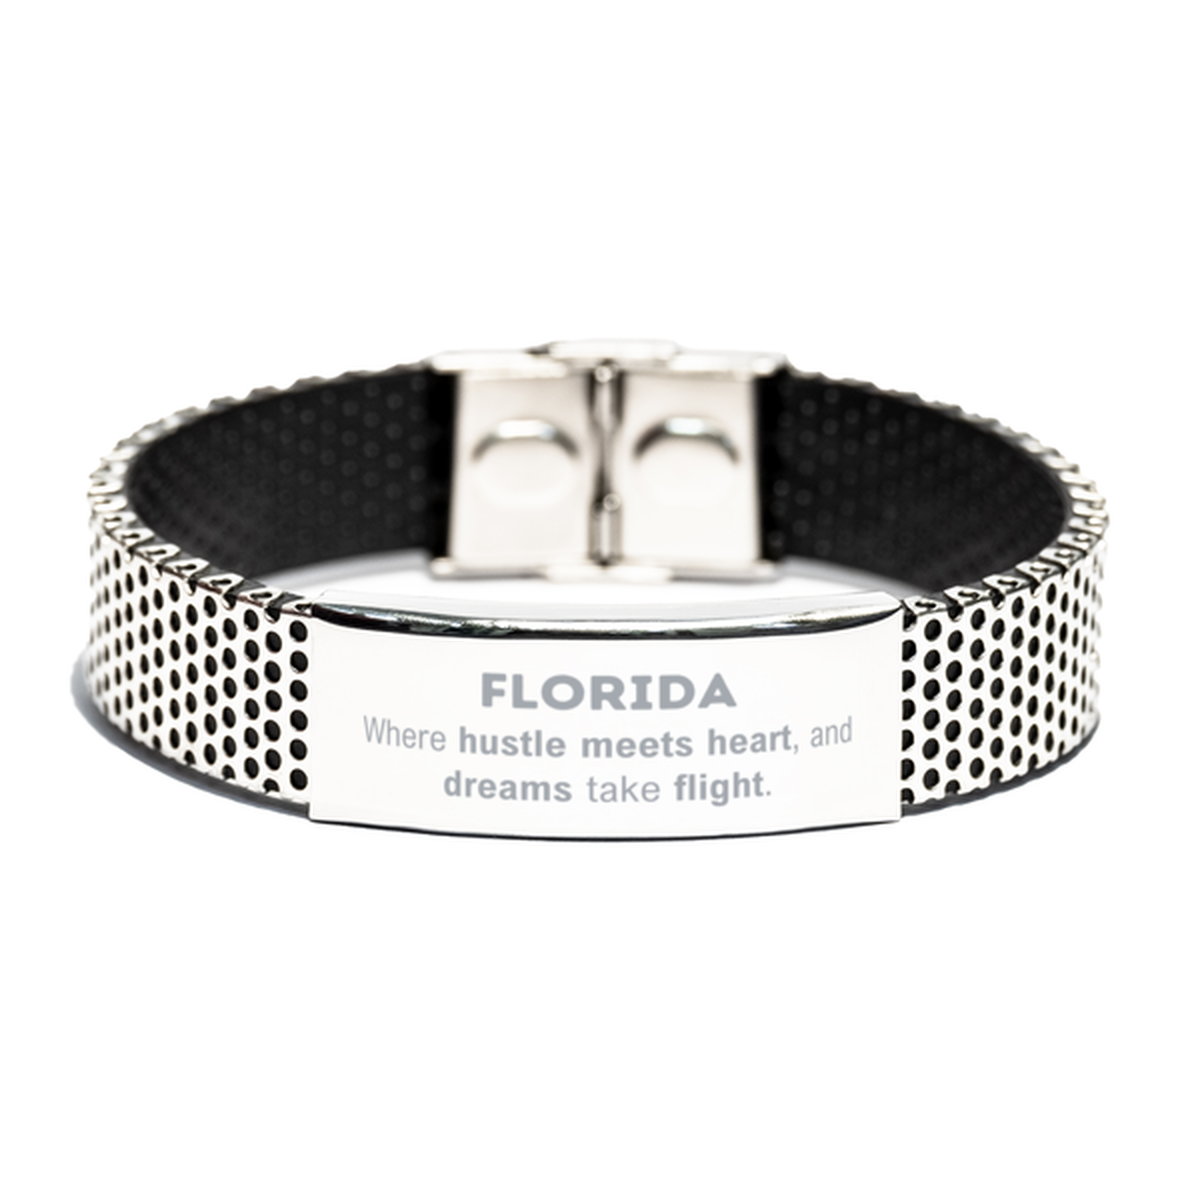 Florida: Where hustle meets heart, and dreams take flight, Florida Gifts, Proud Florida Christmas Birthday Florida Stainless Steel Bracelet, Florida State People, Men, Women, Friends